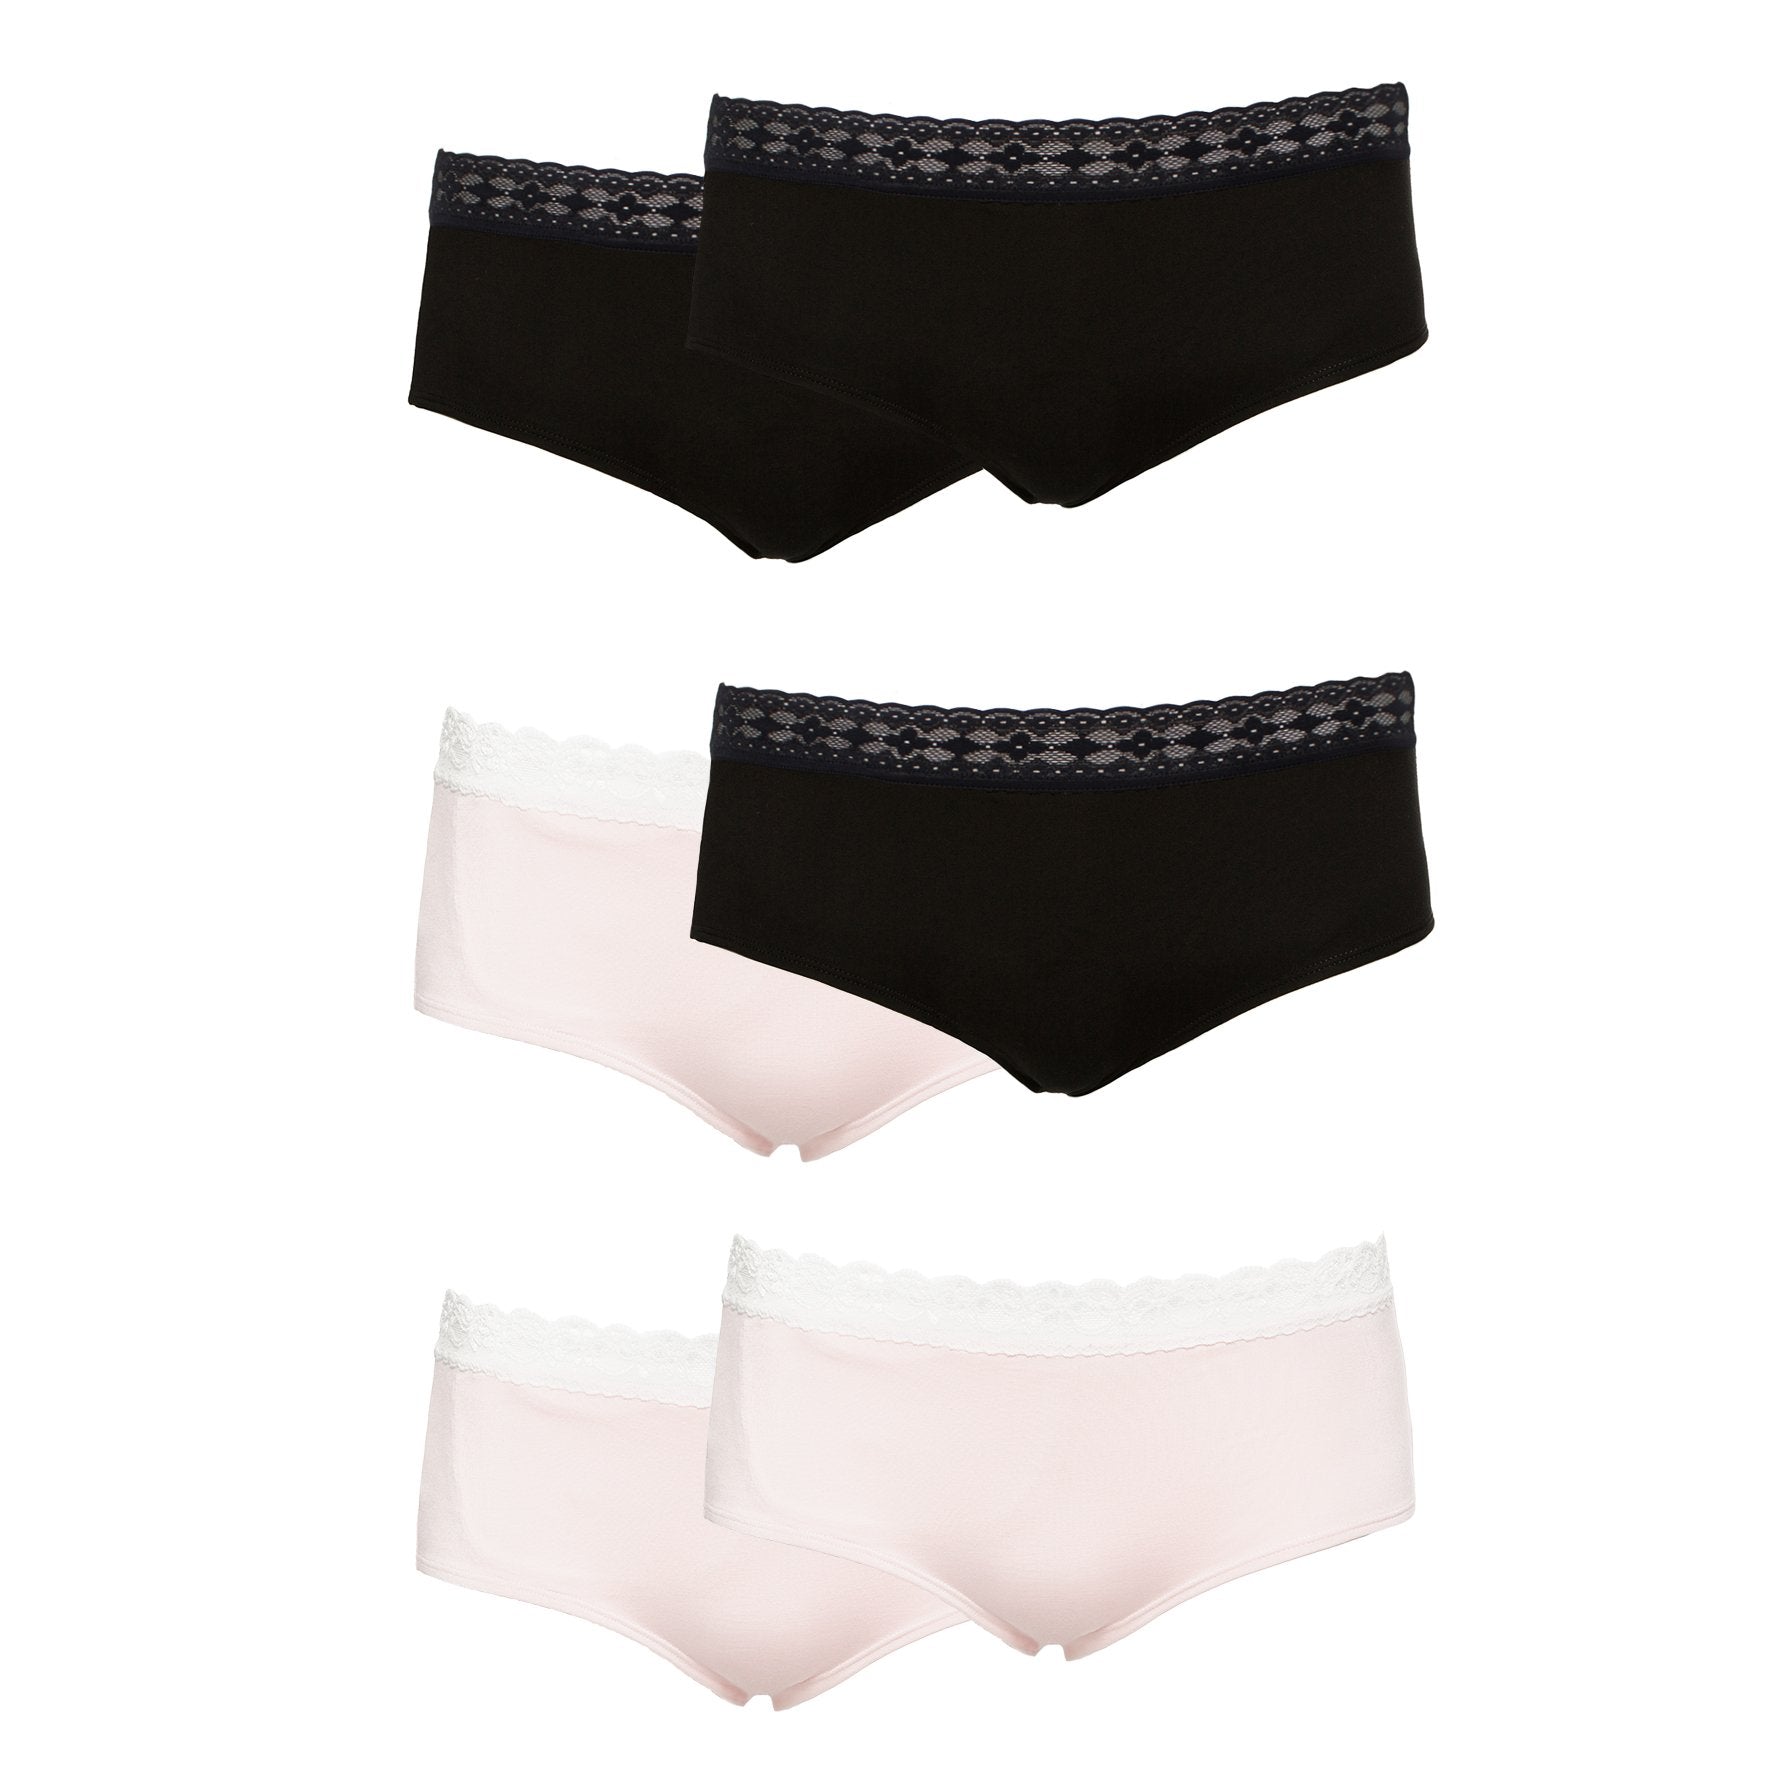 Ruby Limes insulin pump panty set in black and rose